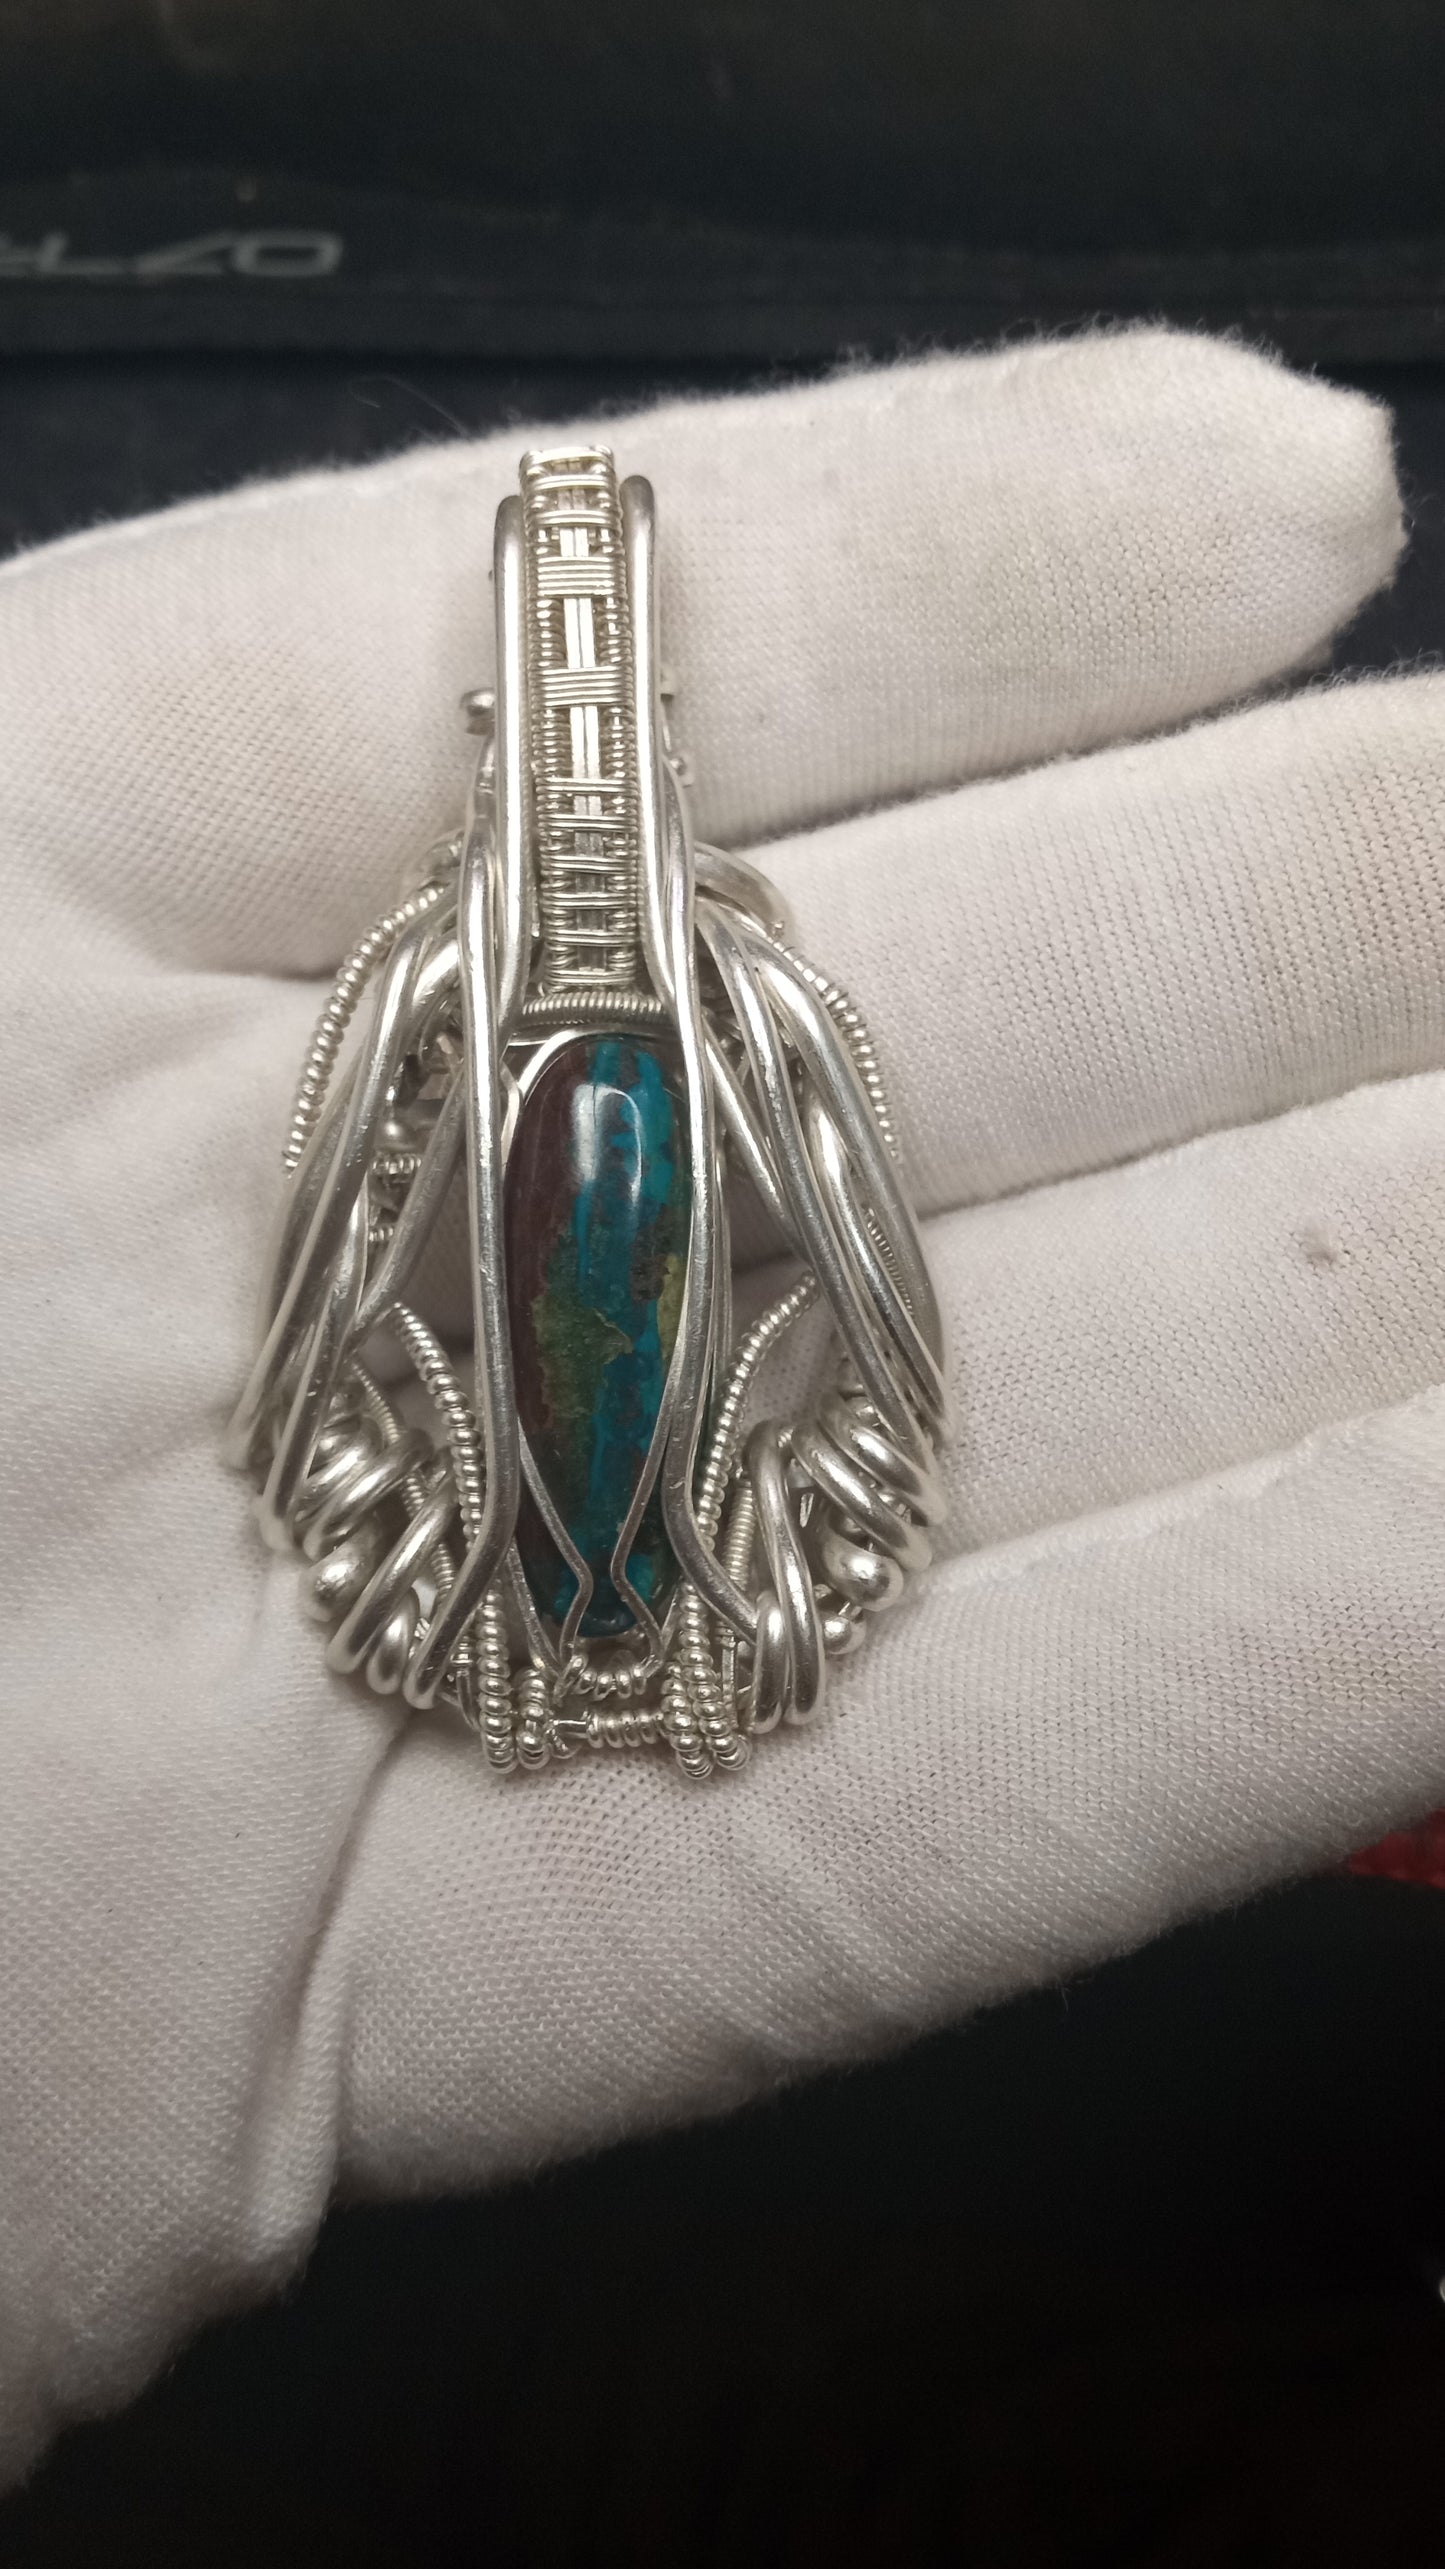 Shattuckite heady style wire wrapped pendant "GIGER DREAMS"